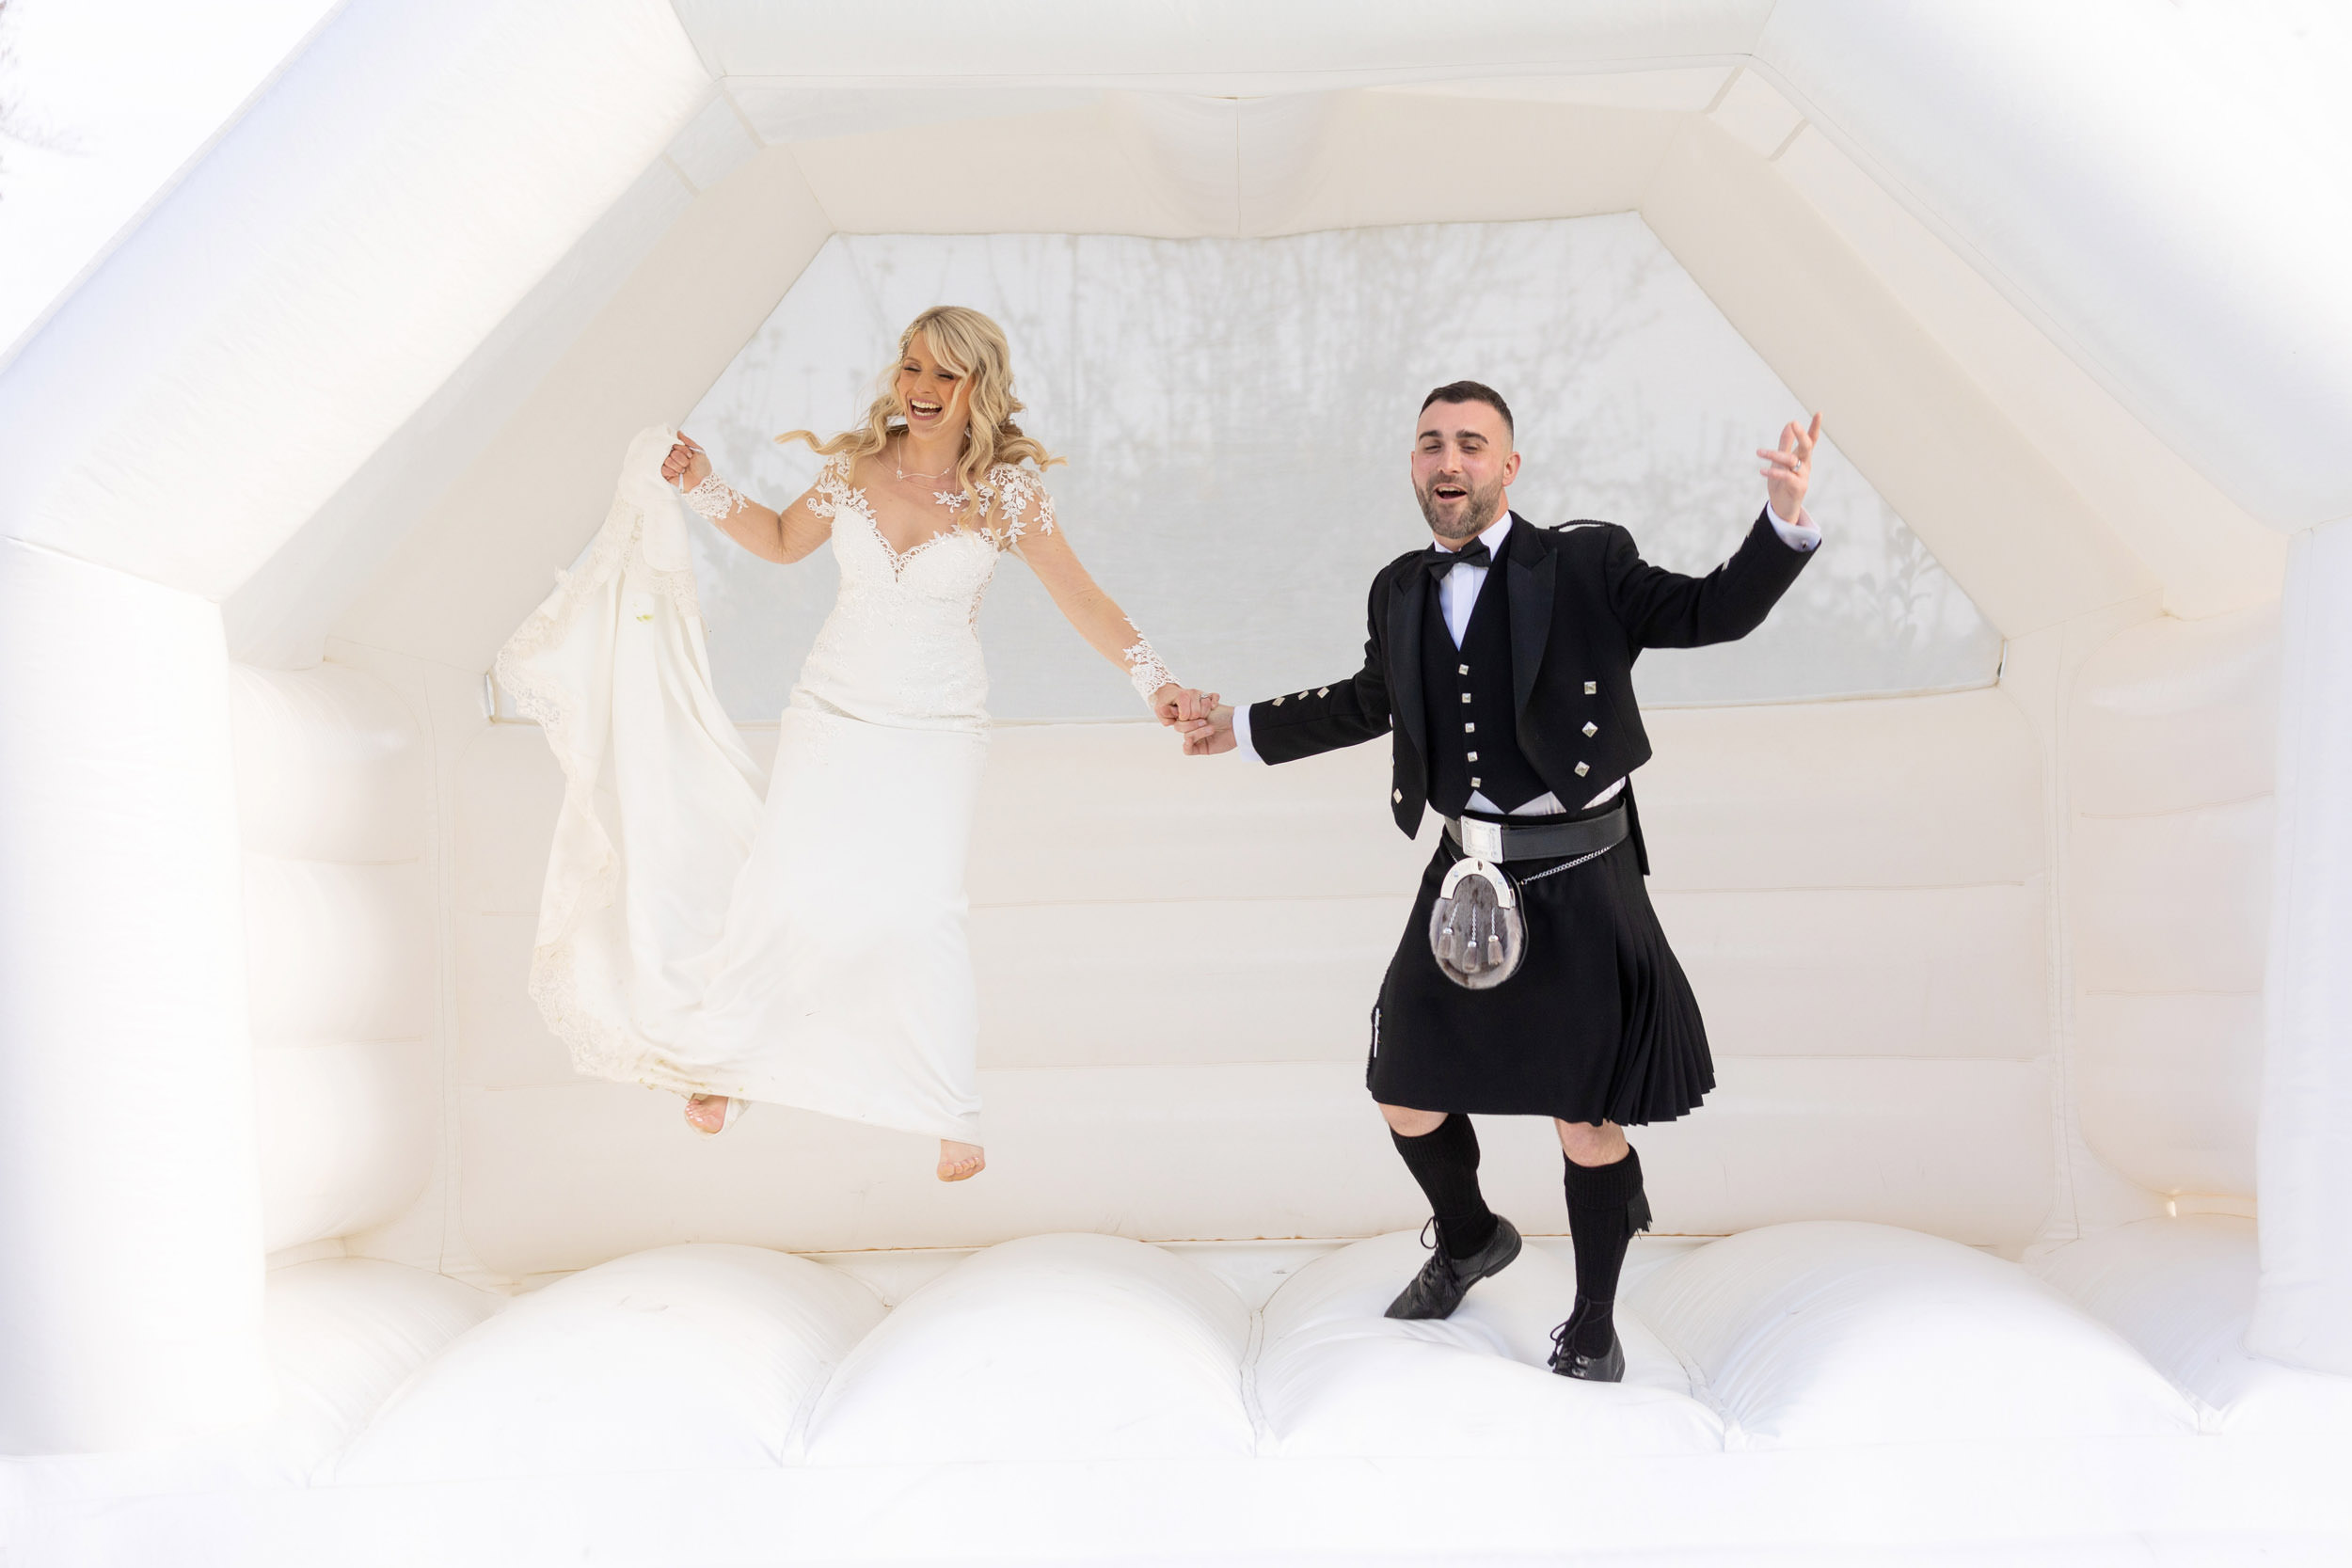 bride and groom in kilt jumping on bouncy castle holding hands